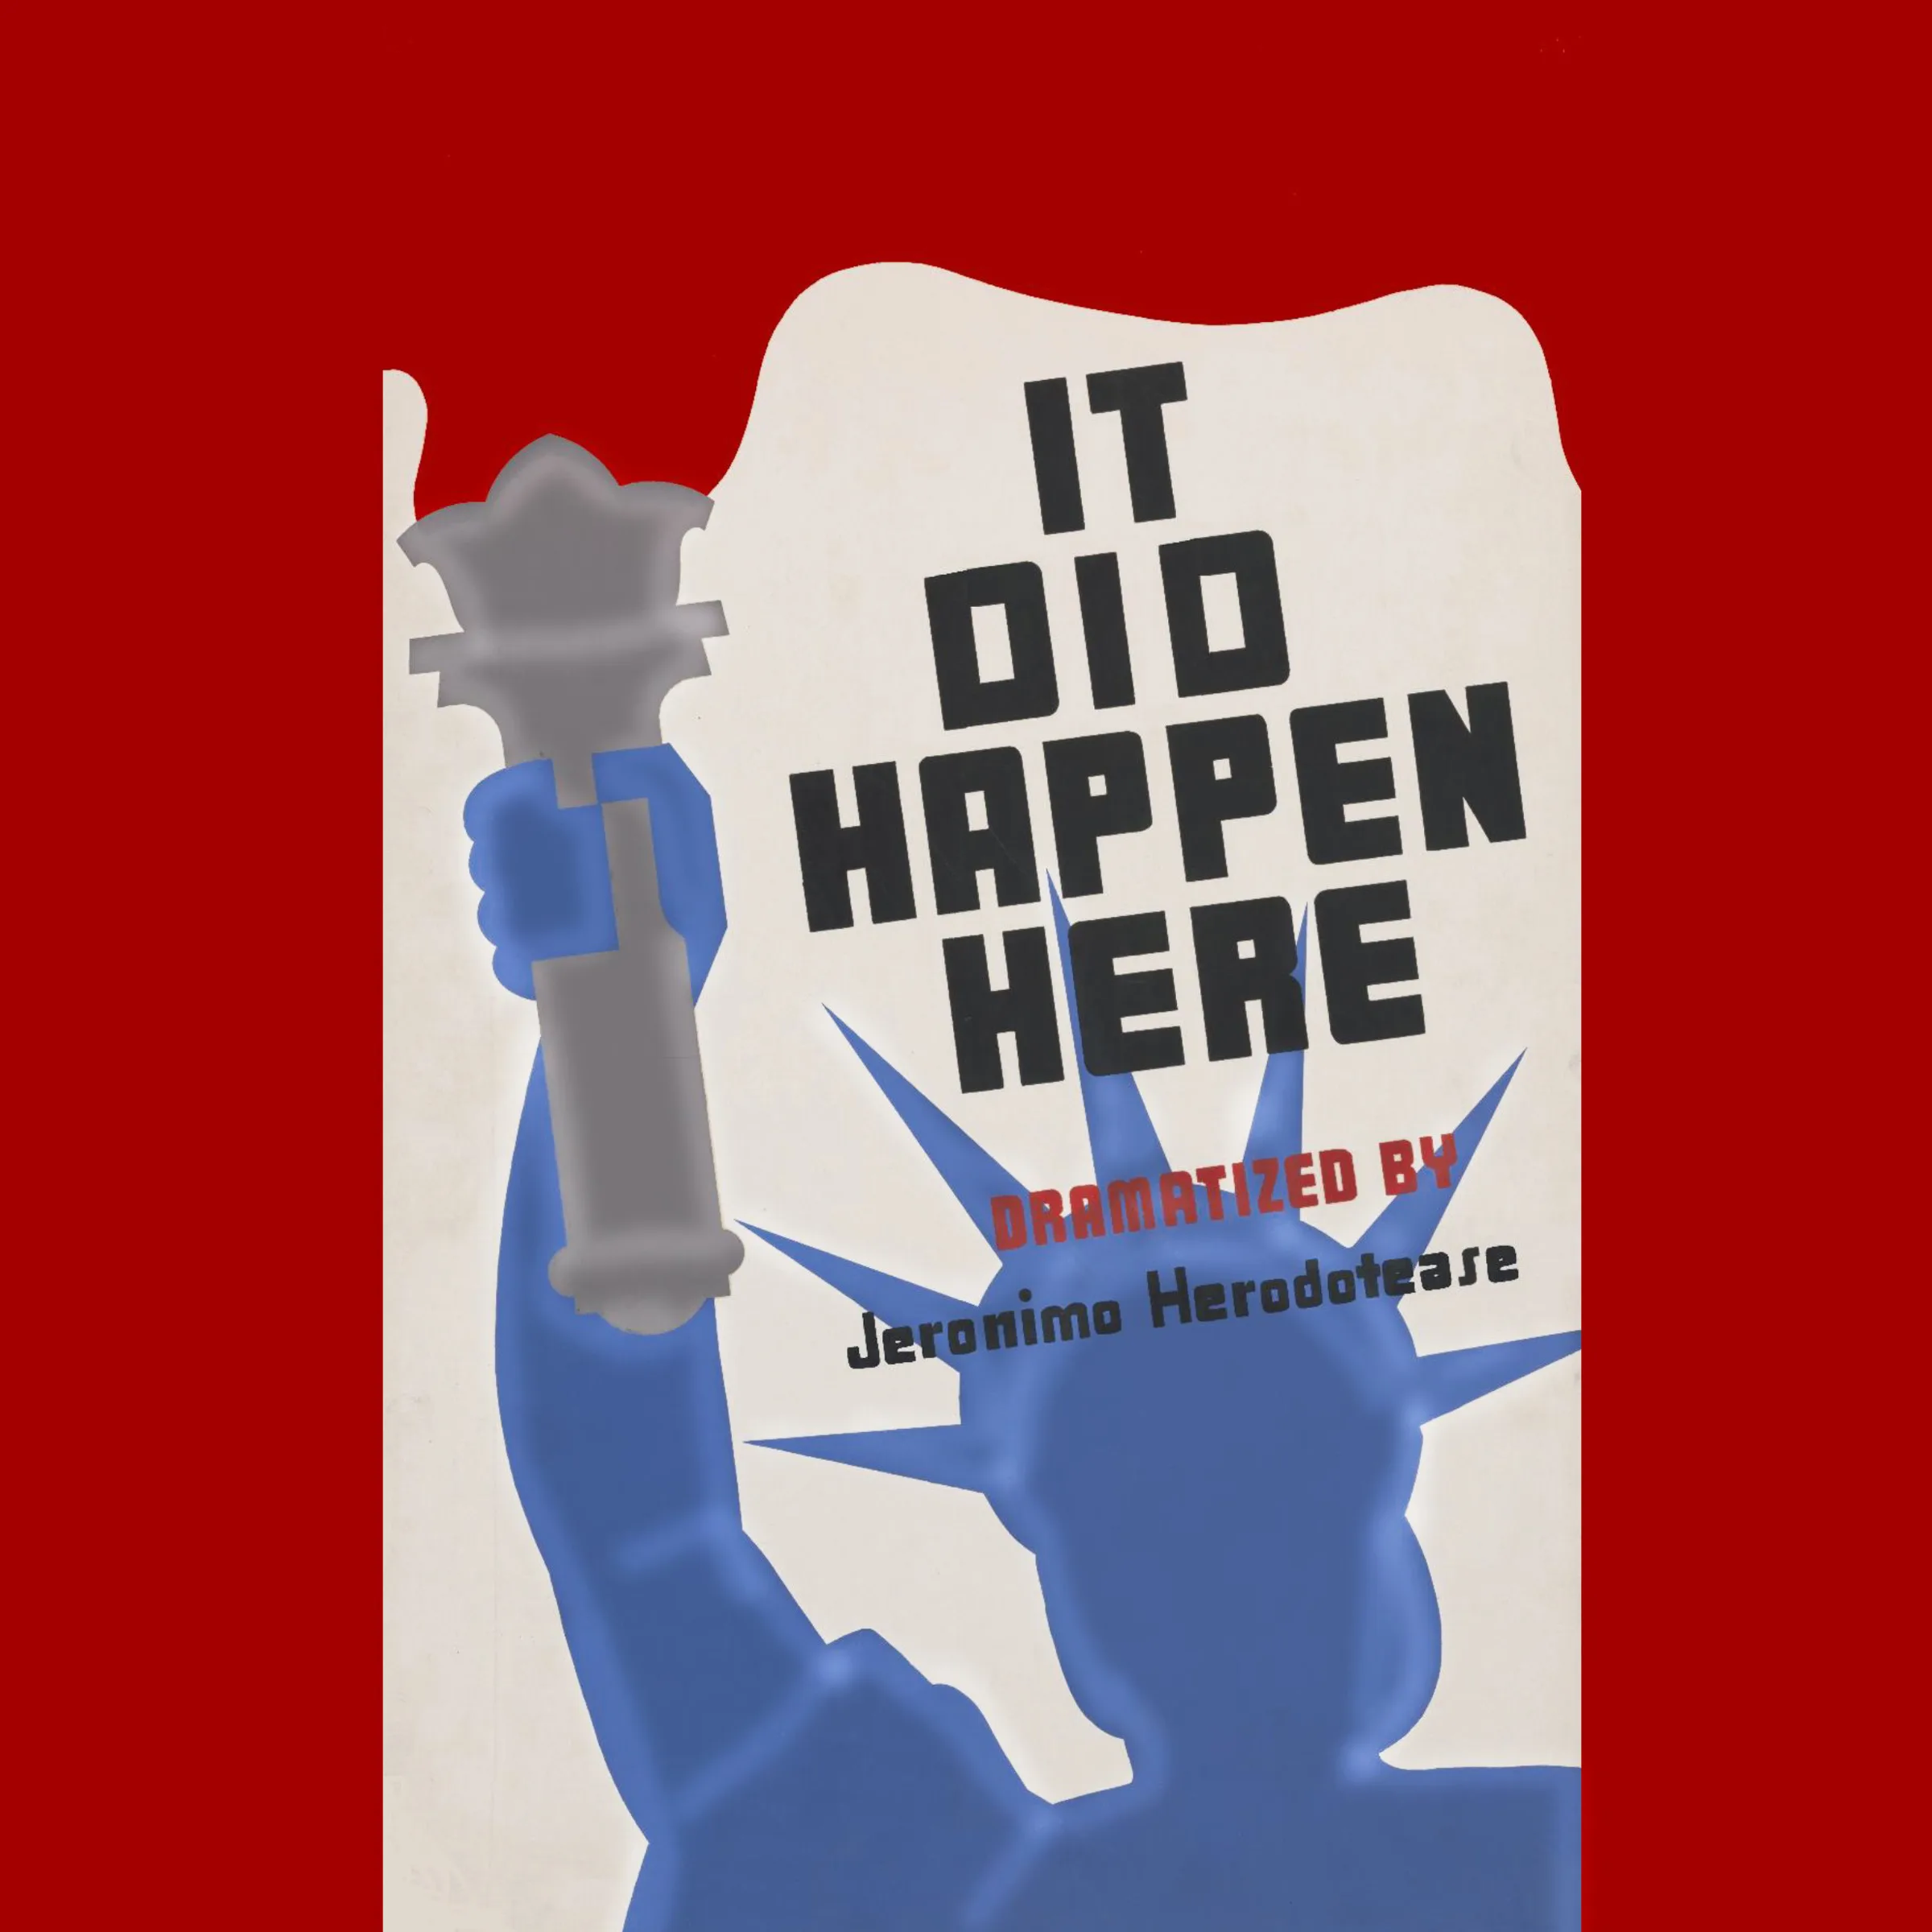 It Did Happen Here, by Jeronimo Herodotease